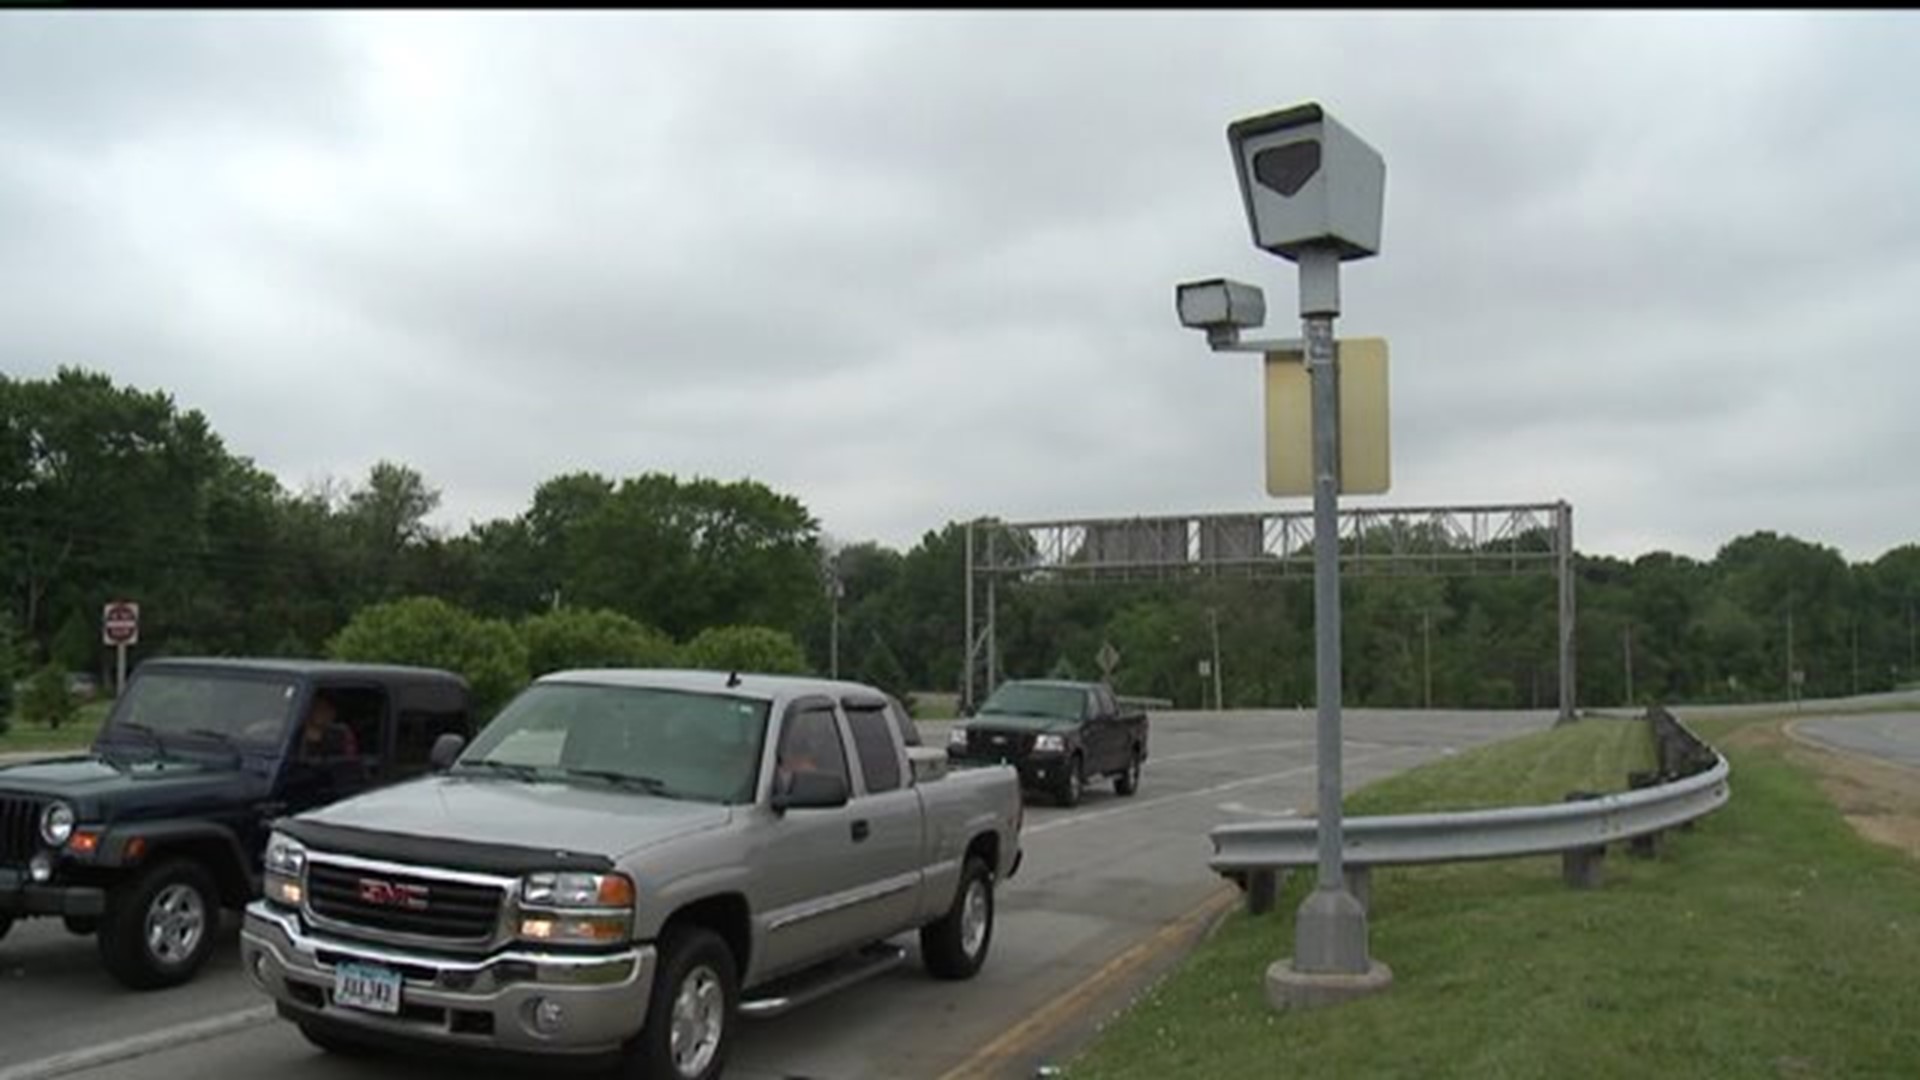 Davenport offers last chance for drivers with overdue tickets